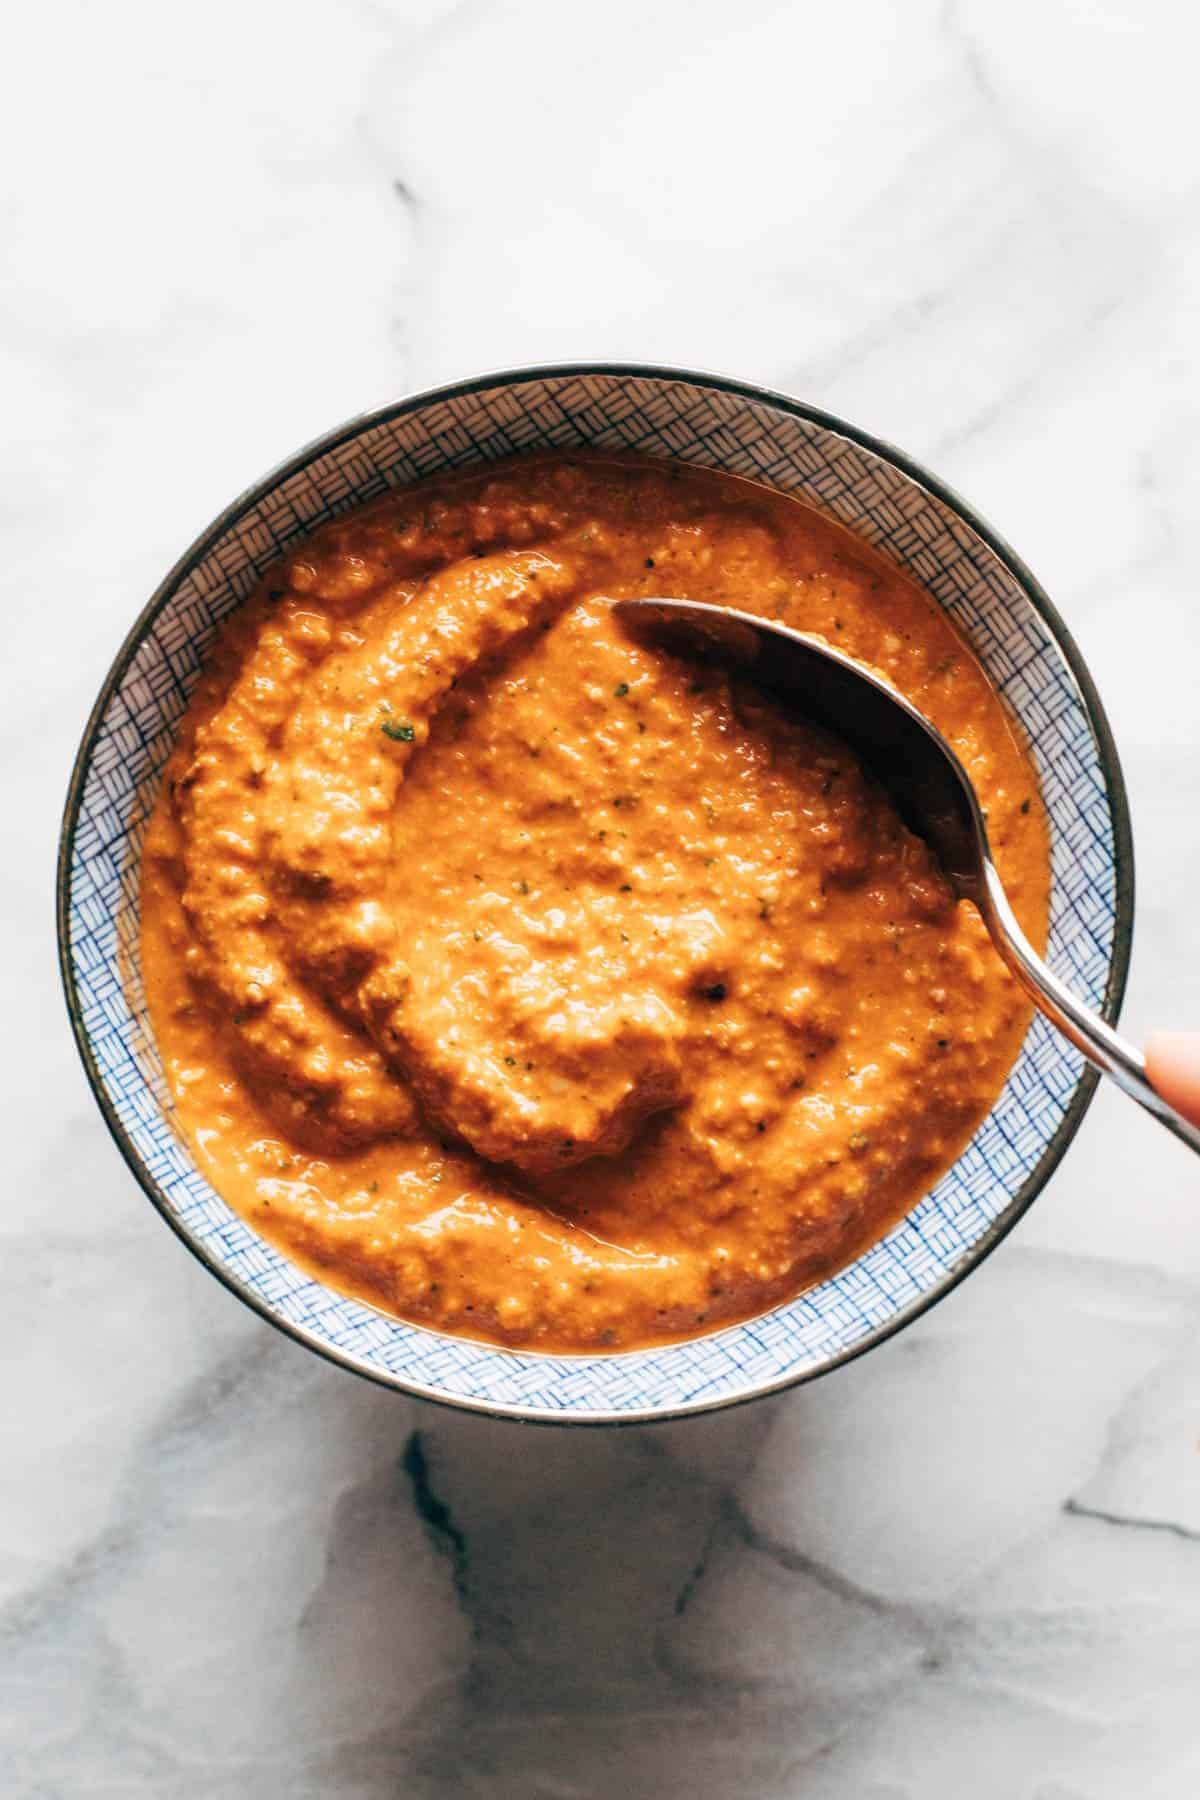 Romesco sauce in a bowl with a spoon.